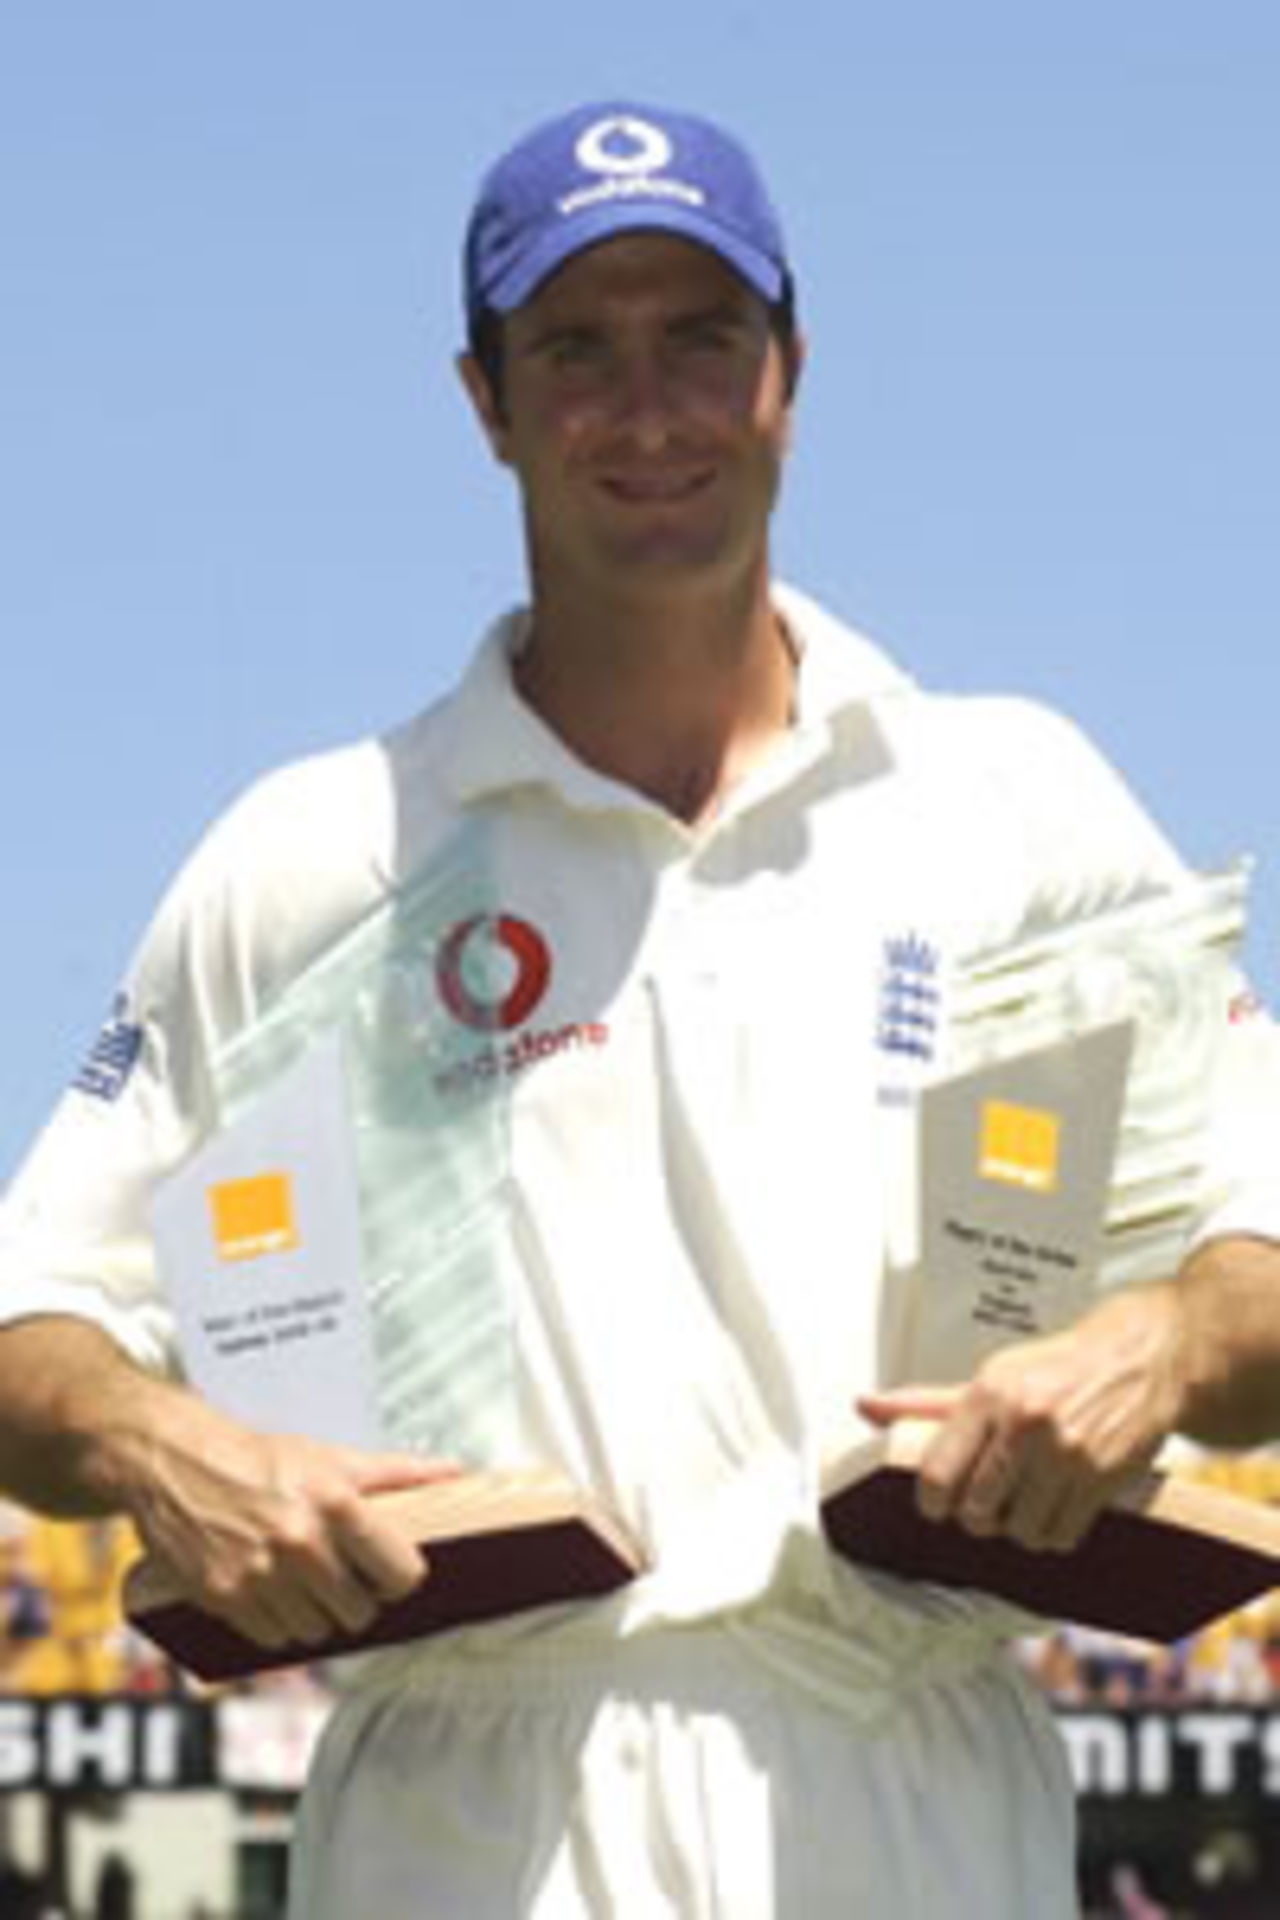 SYDNEY - JANUARY 6: Michael Vaughan of England poses with his man of the match and man of the series trophy during the fifth and final day of the fifth Ashes Test between Australia and England at the Sydney Cricket Ground, Sydney, Australia on January 6, 2003.